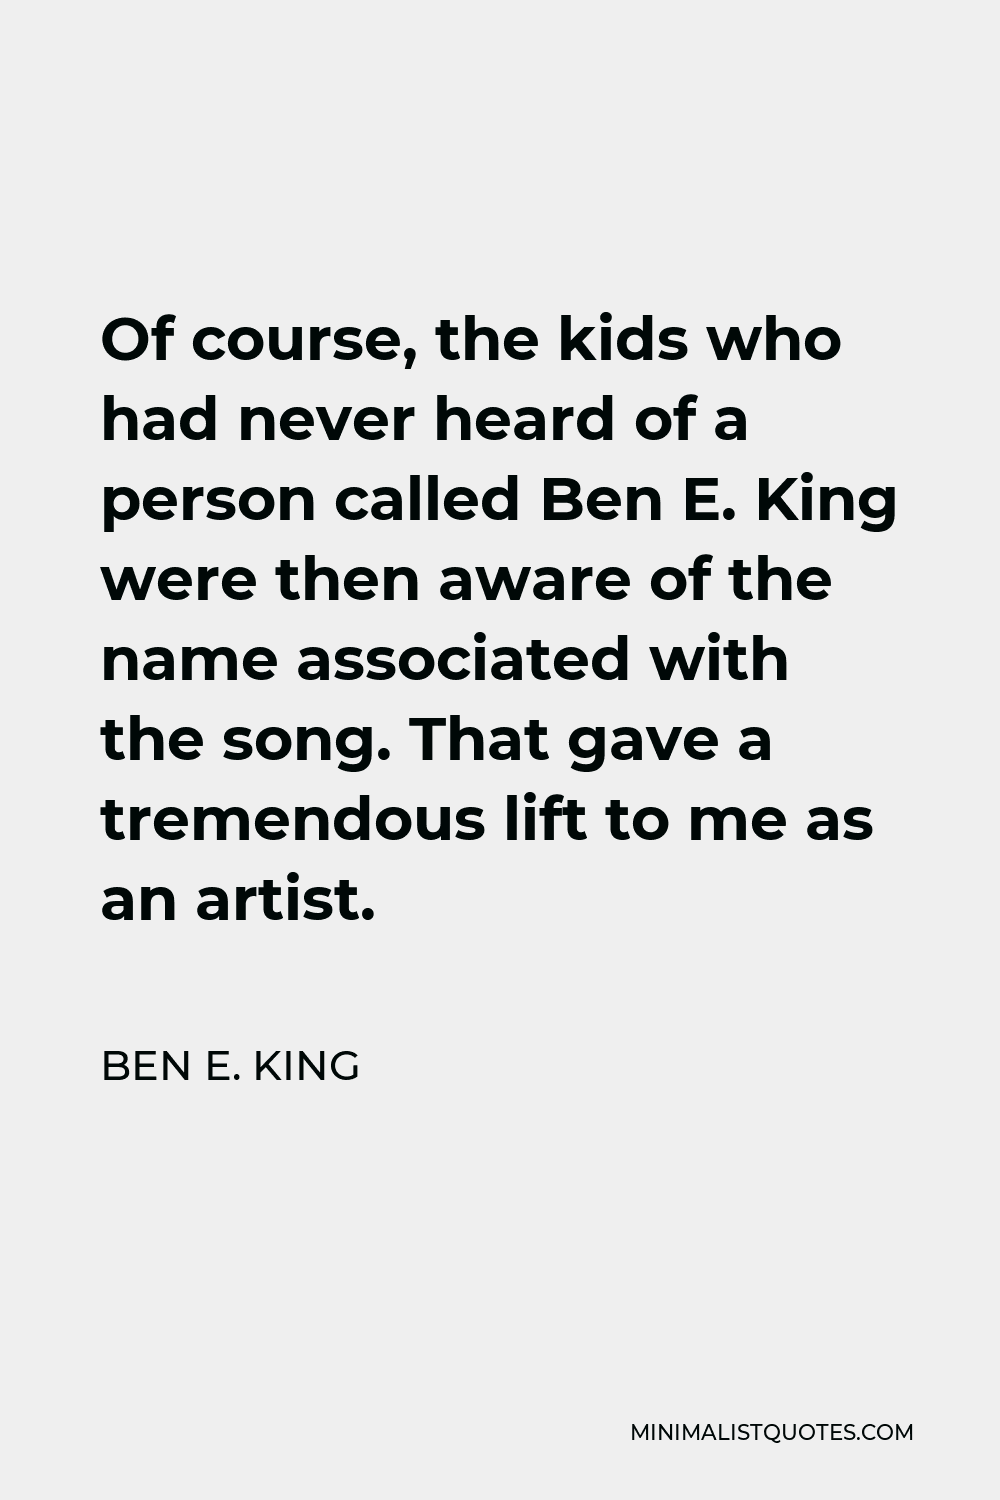 Ben E. King Quote - Of course, the kids who had never heard of a person called Ben E. King were then aware of the name associated with the song. That gave a tremendous lift to me as an artist.